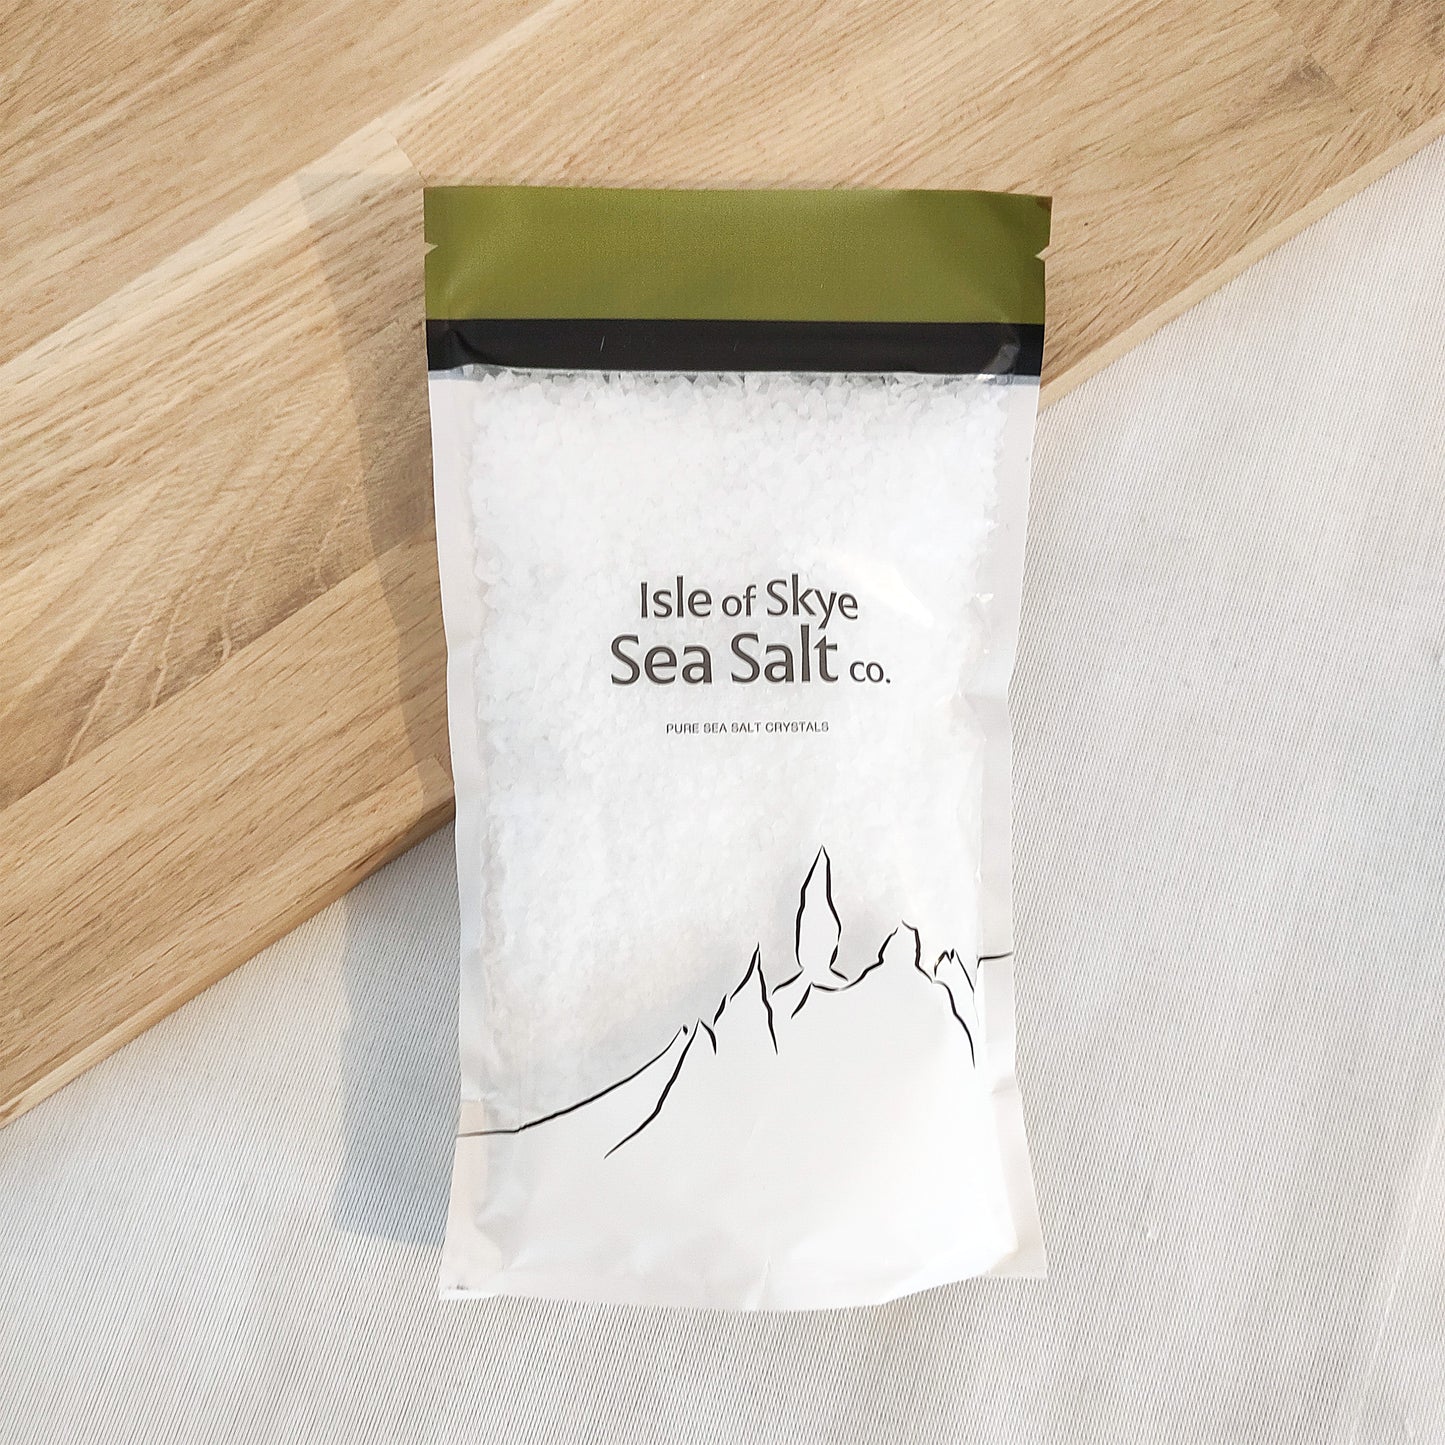 Pure Sea Salt Crystals - Refill pouch 250g or 500g